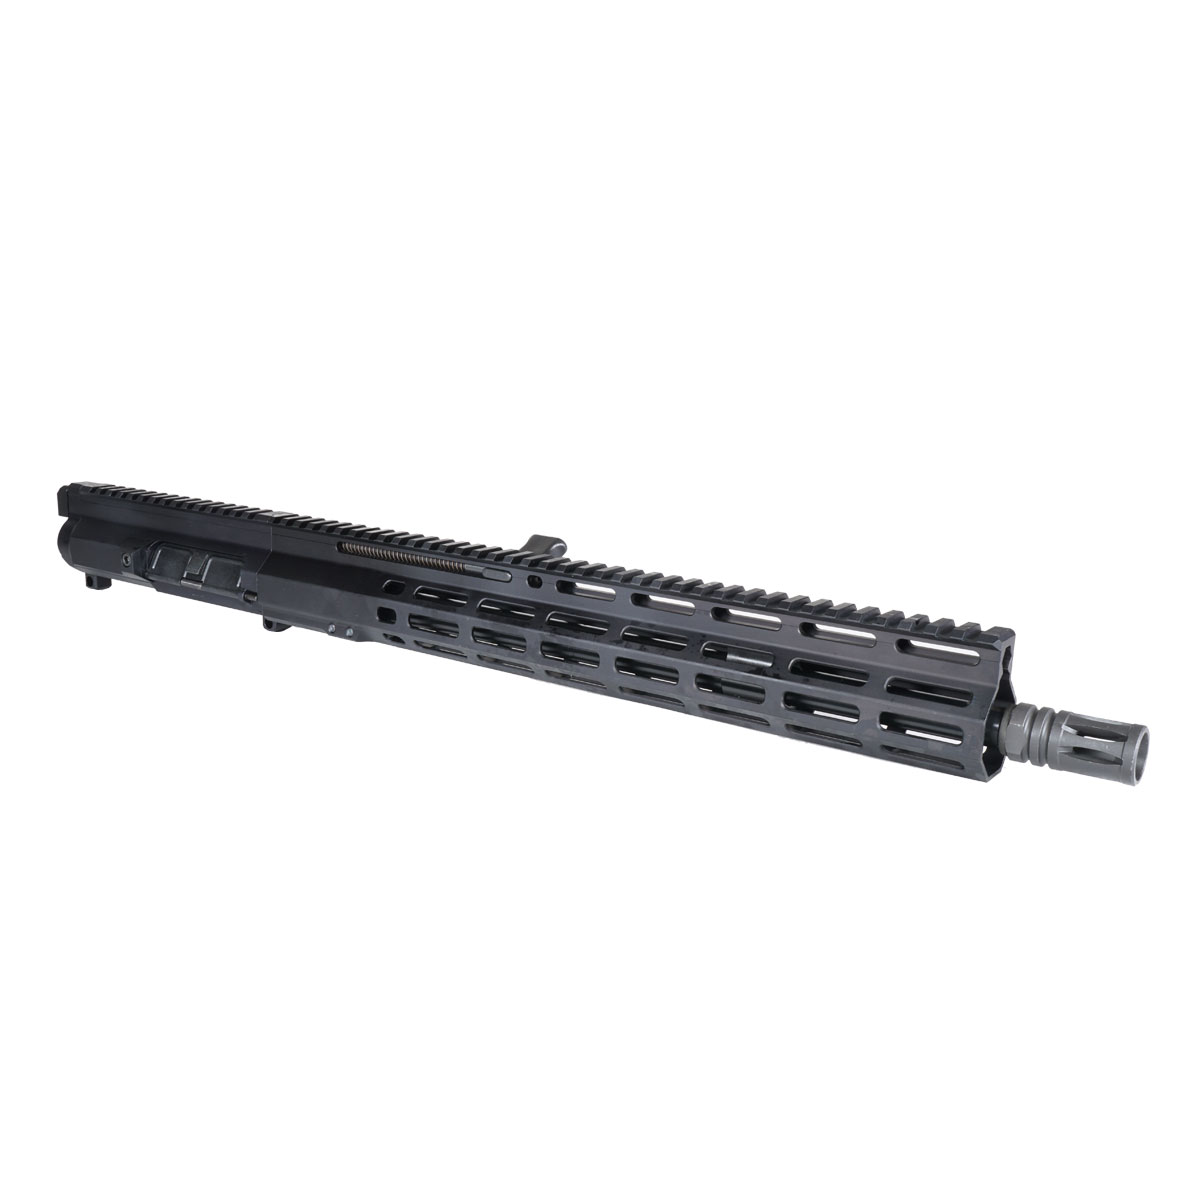 Foxtrot Mike MIKE-15 .223 Wylde Gen 2 Complete Upper, 4-Position Front Charge, 16